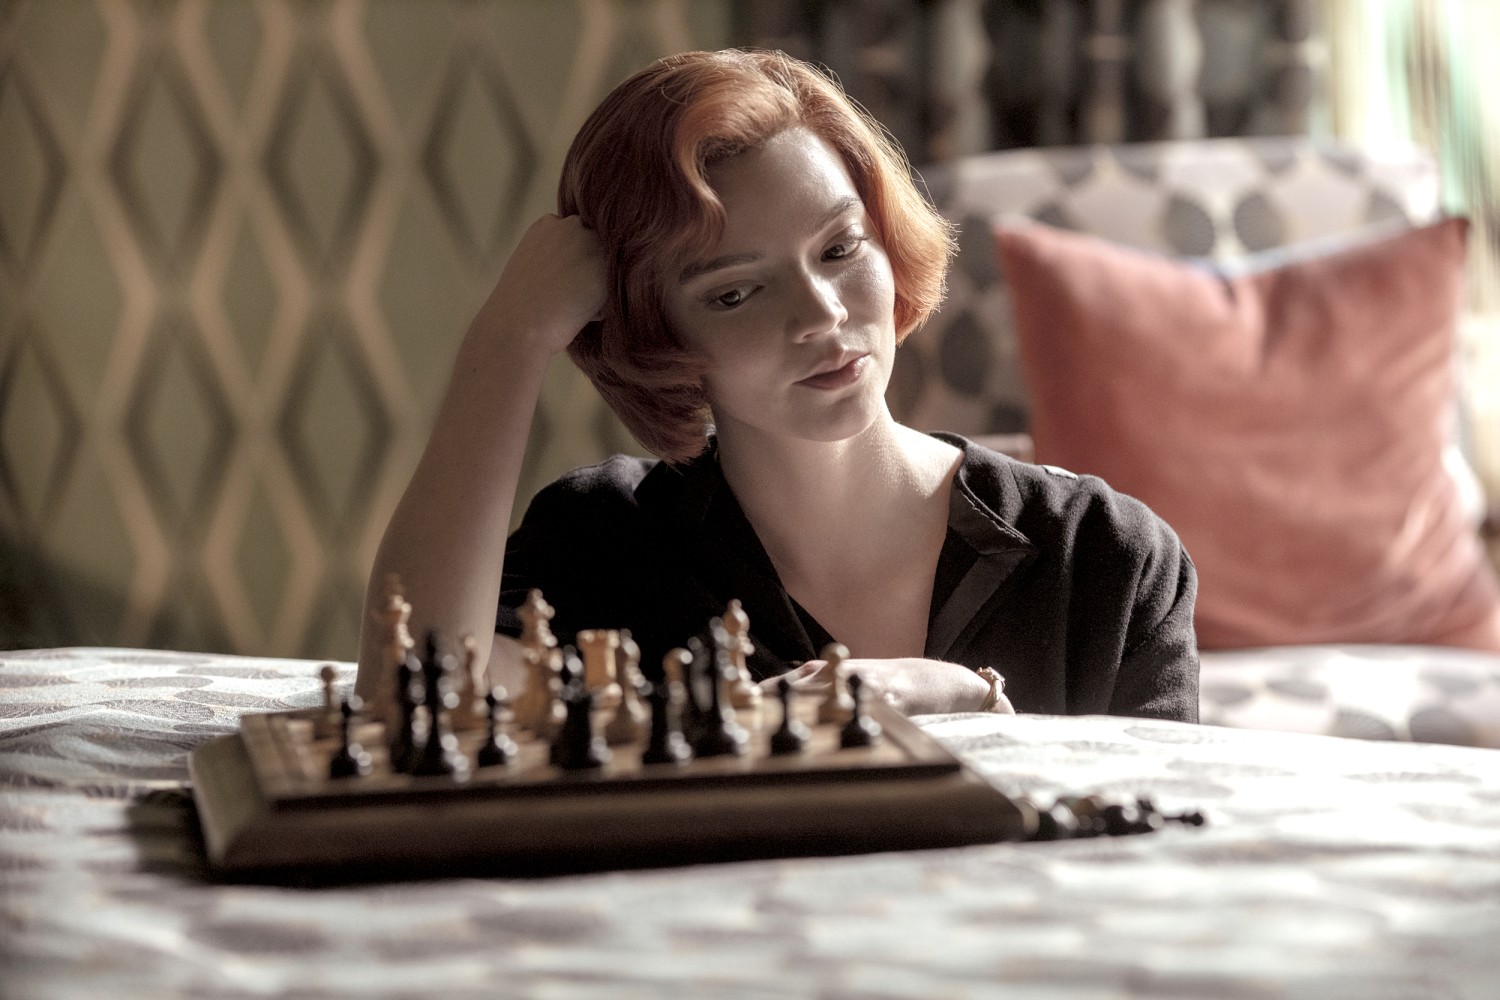 Why do people like Queen's Gambit so much? I like the show because I like  chess, but many non-chess players also love it. I think if the same story  replaced chess with